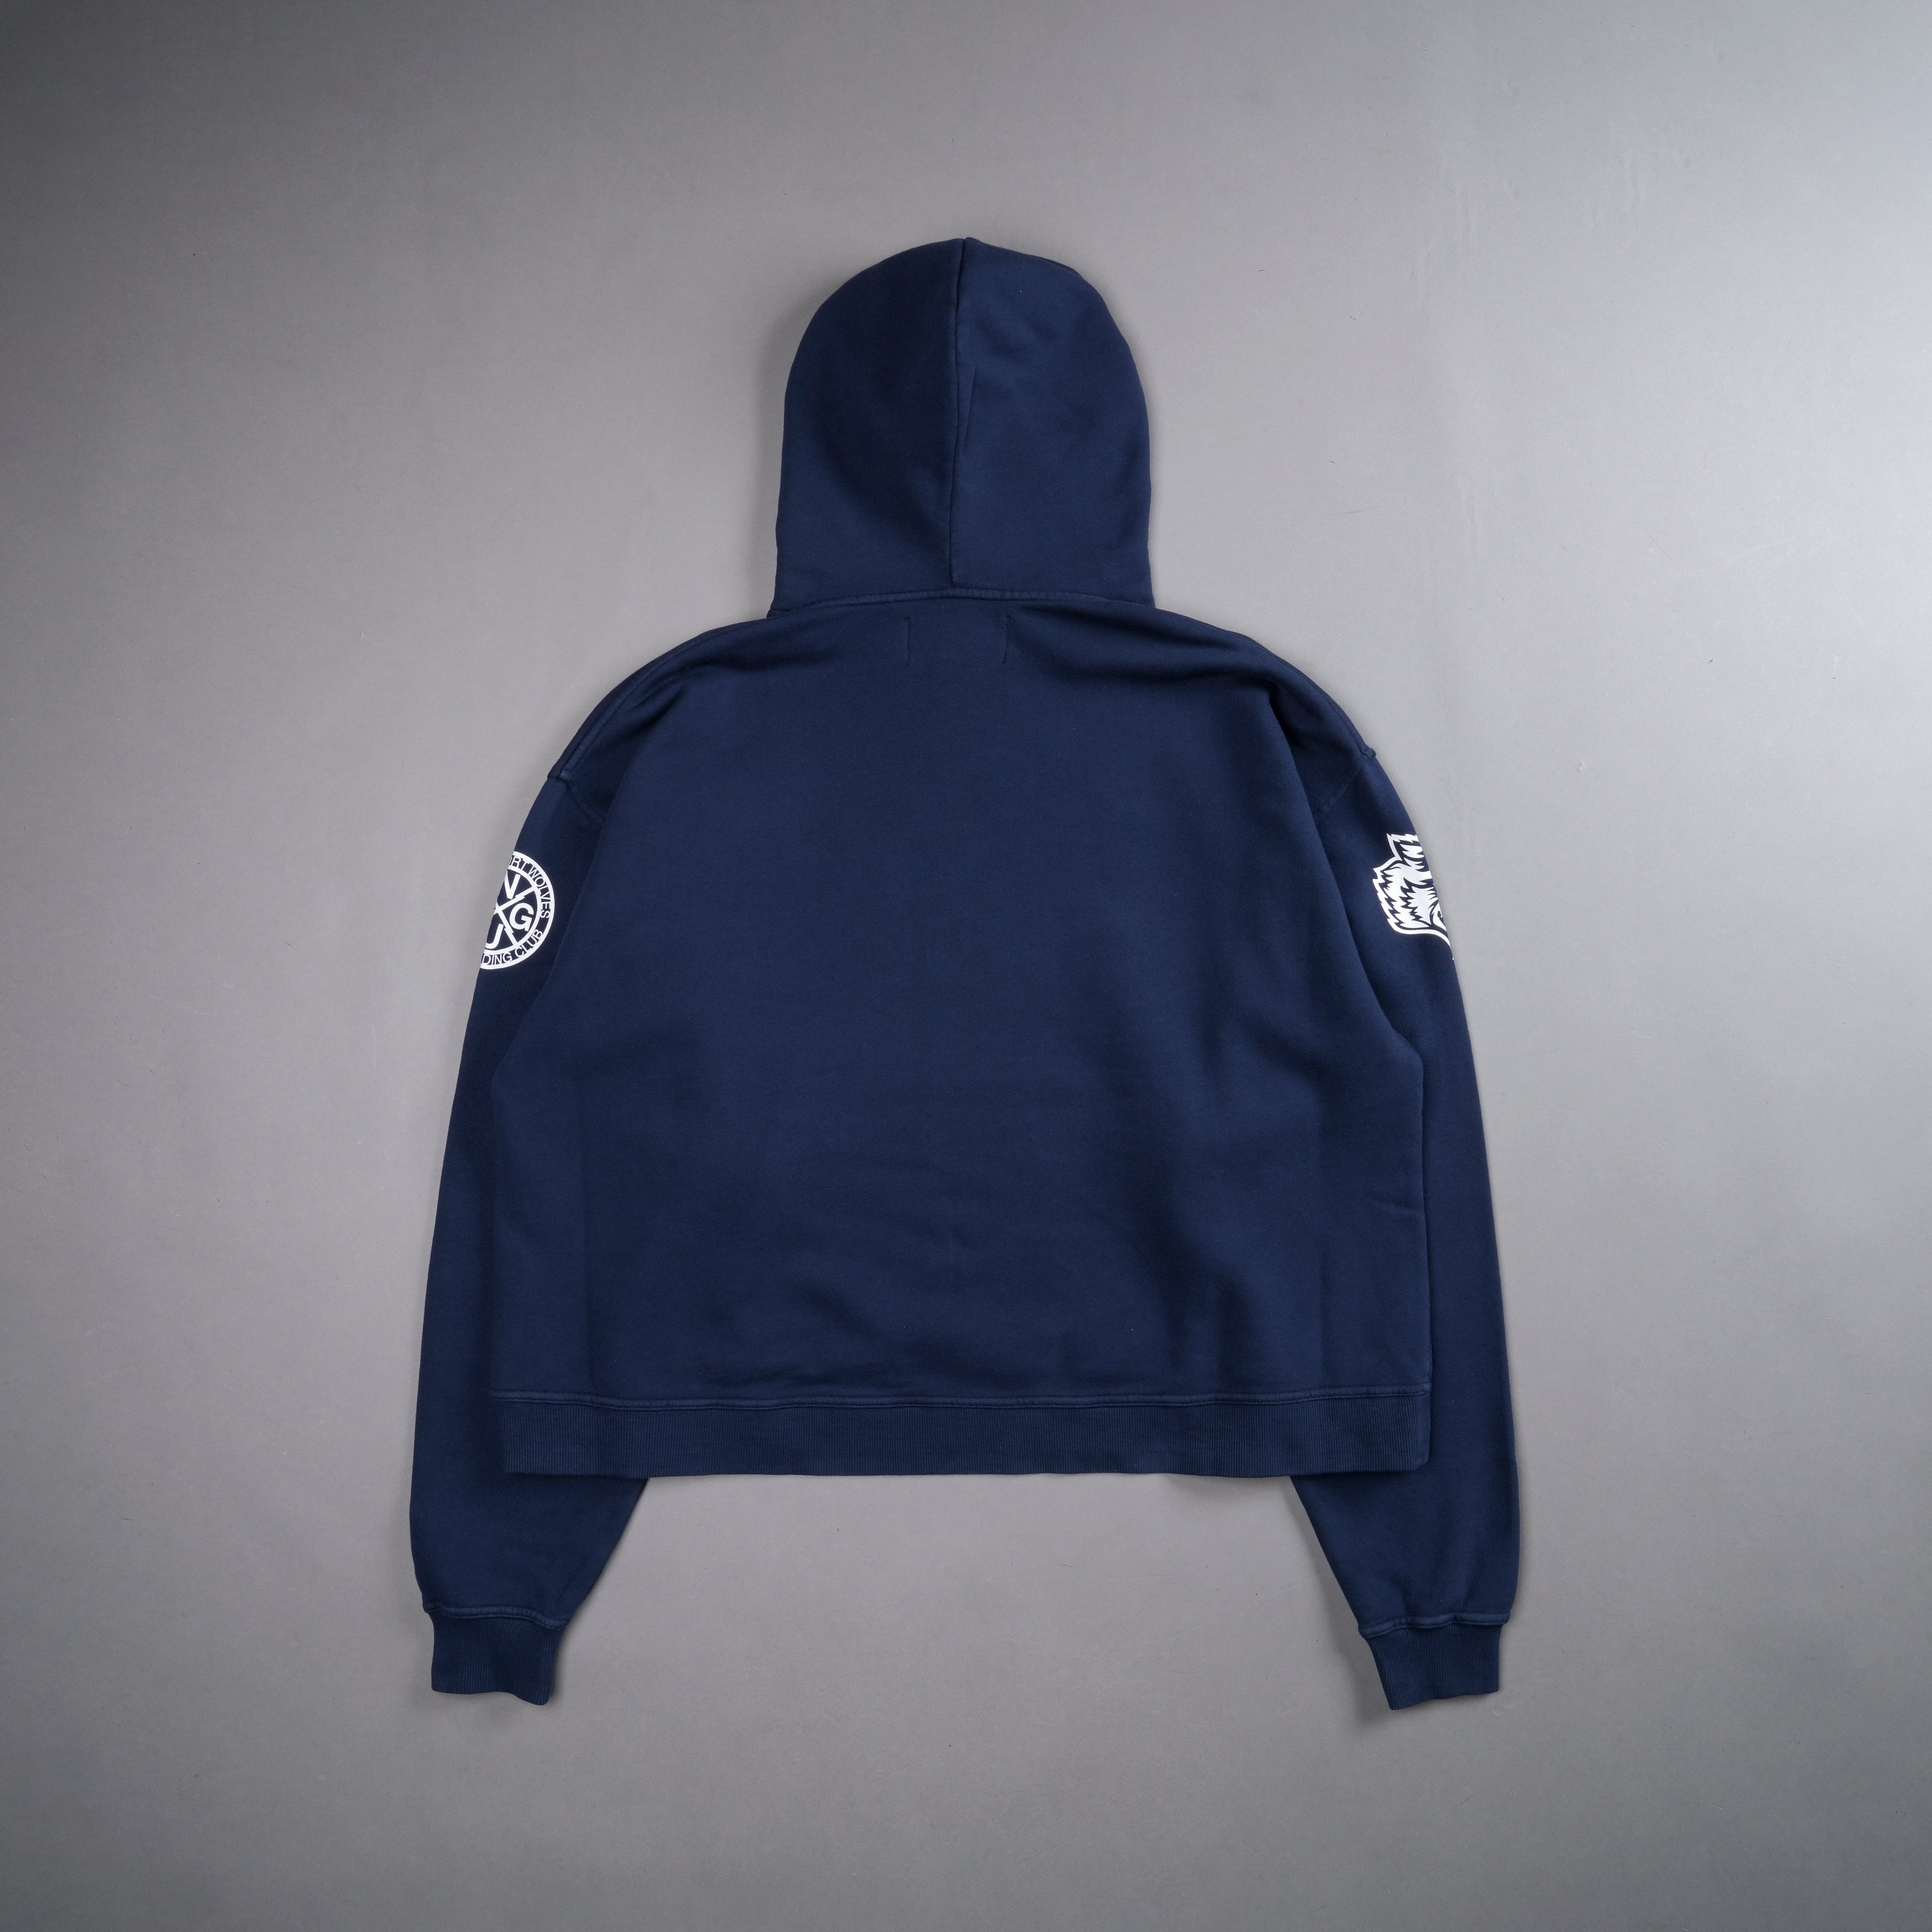 NY Wolves League "Box Cut" Hoodie in Navy